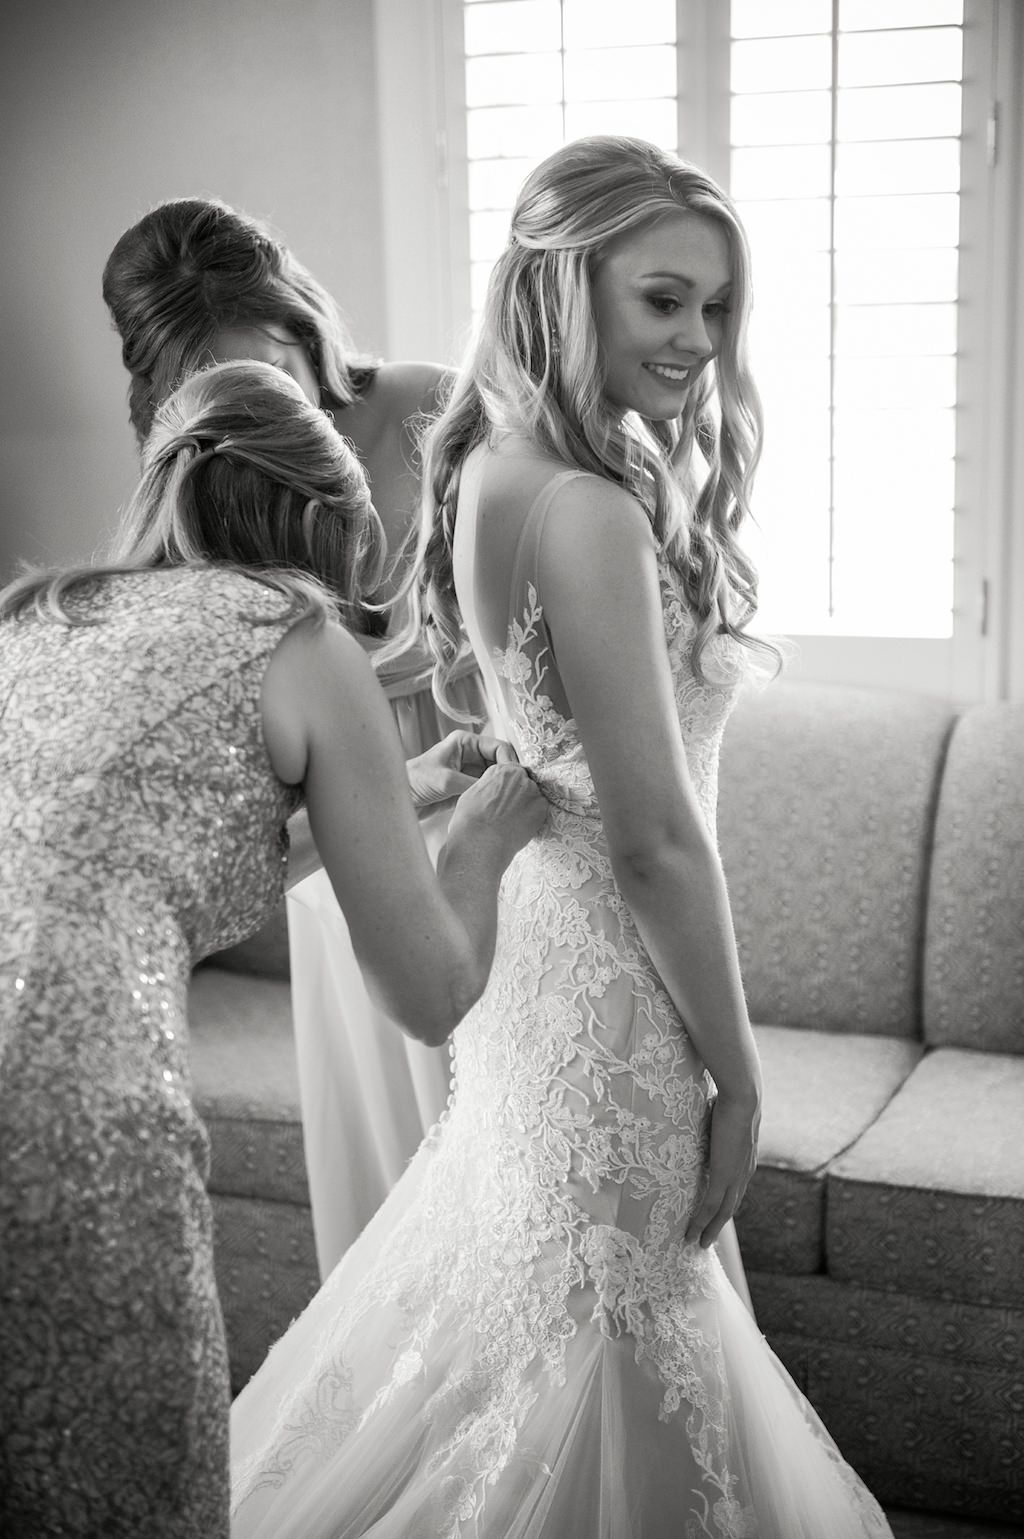 Bride Getting Ready Portrait in Illusion Lace Tank Top Strap Fit and Flare Wedding Dress | Tampa Bay Photographer Andi Diamond Photography | Hair and Makeup Michele Renee the Studio